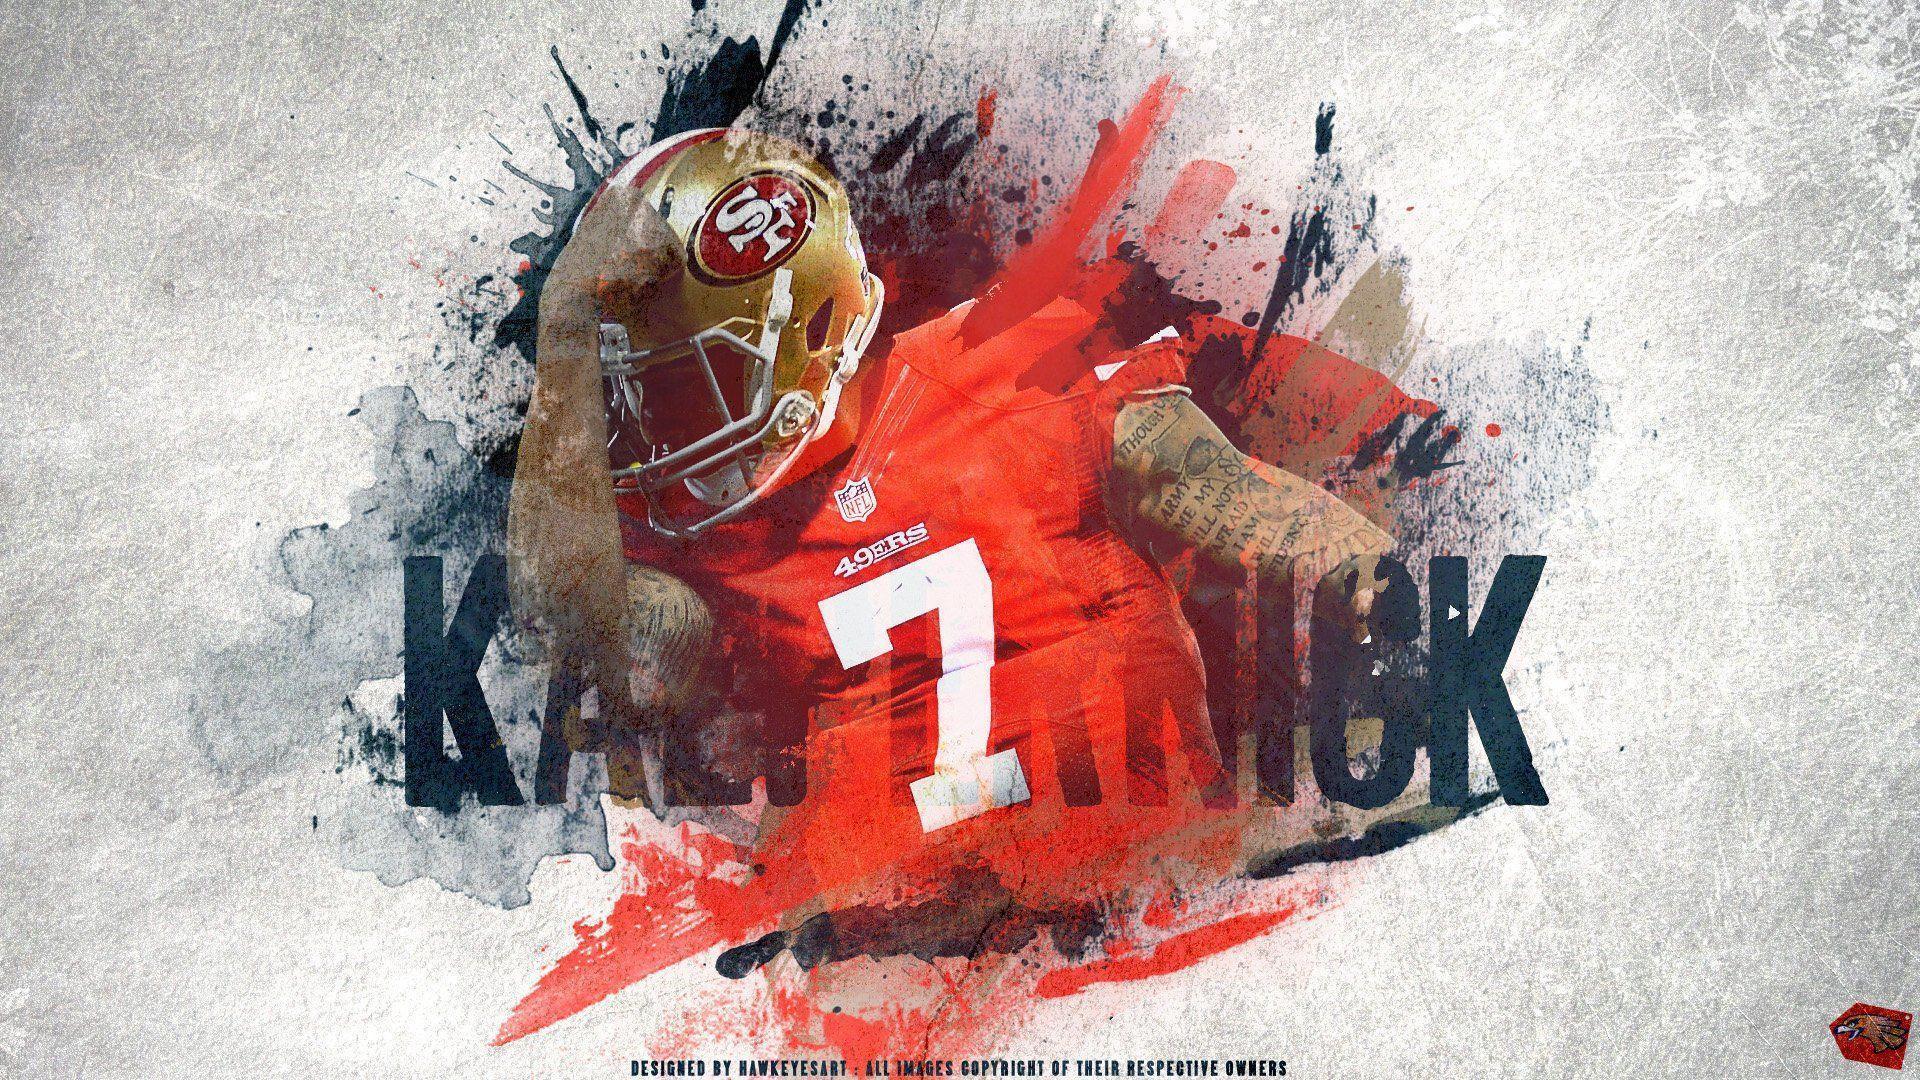 49Ers Wallpaper HD, sciencewikis.org